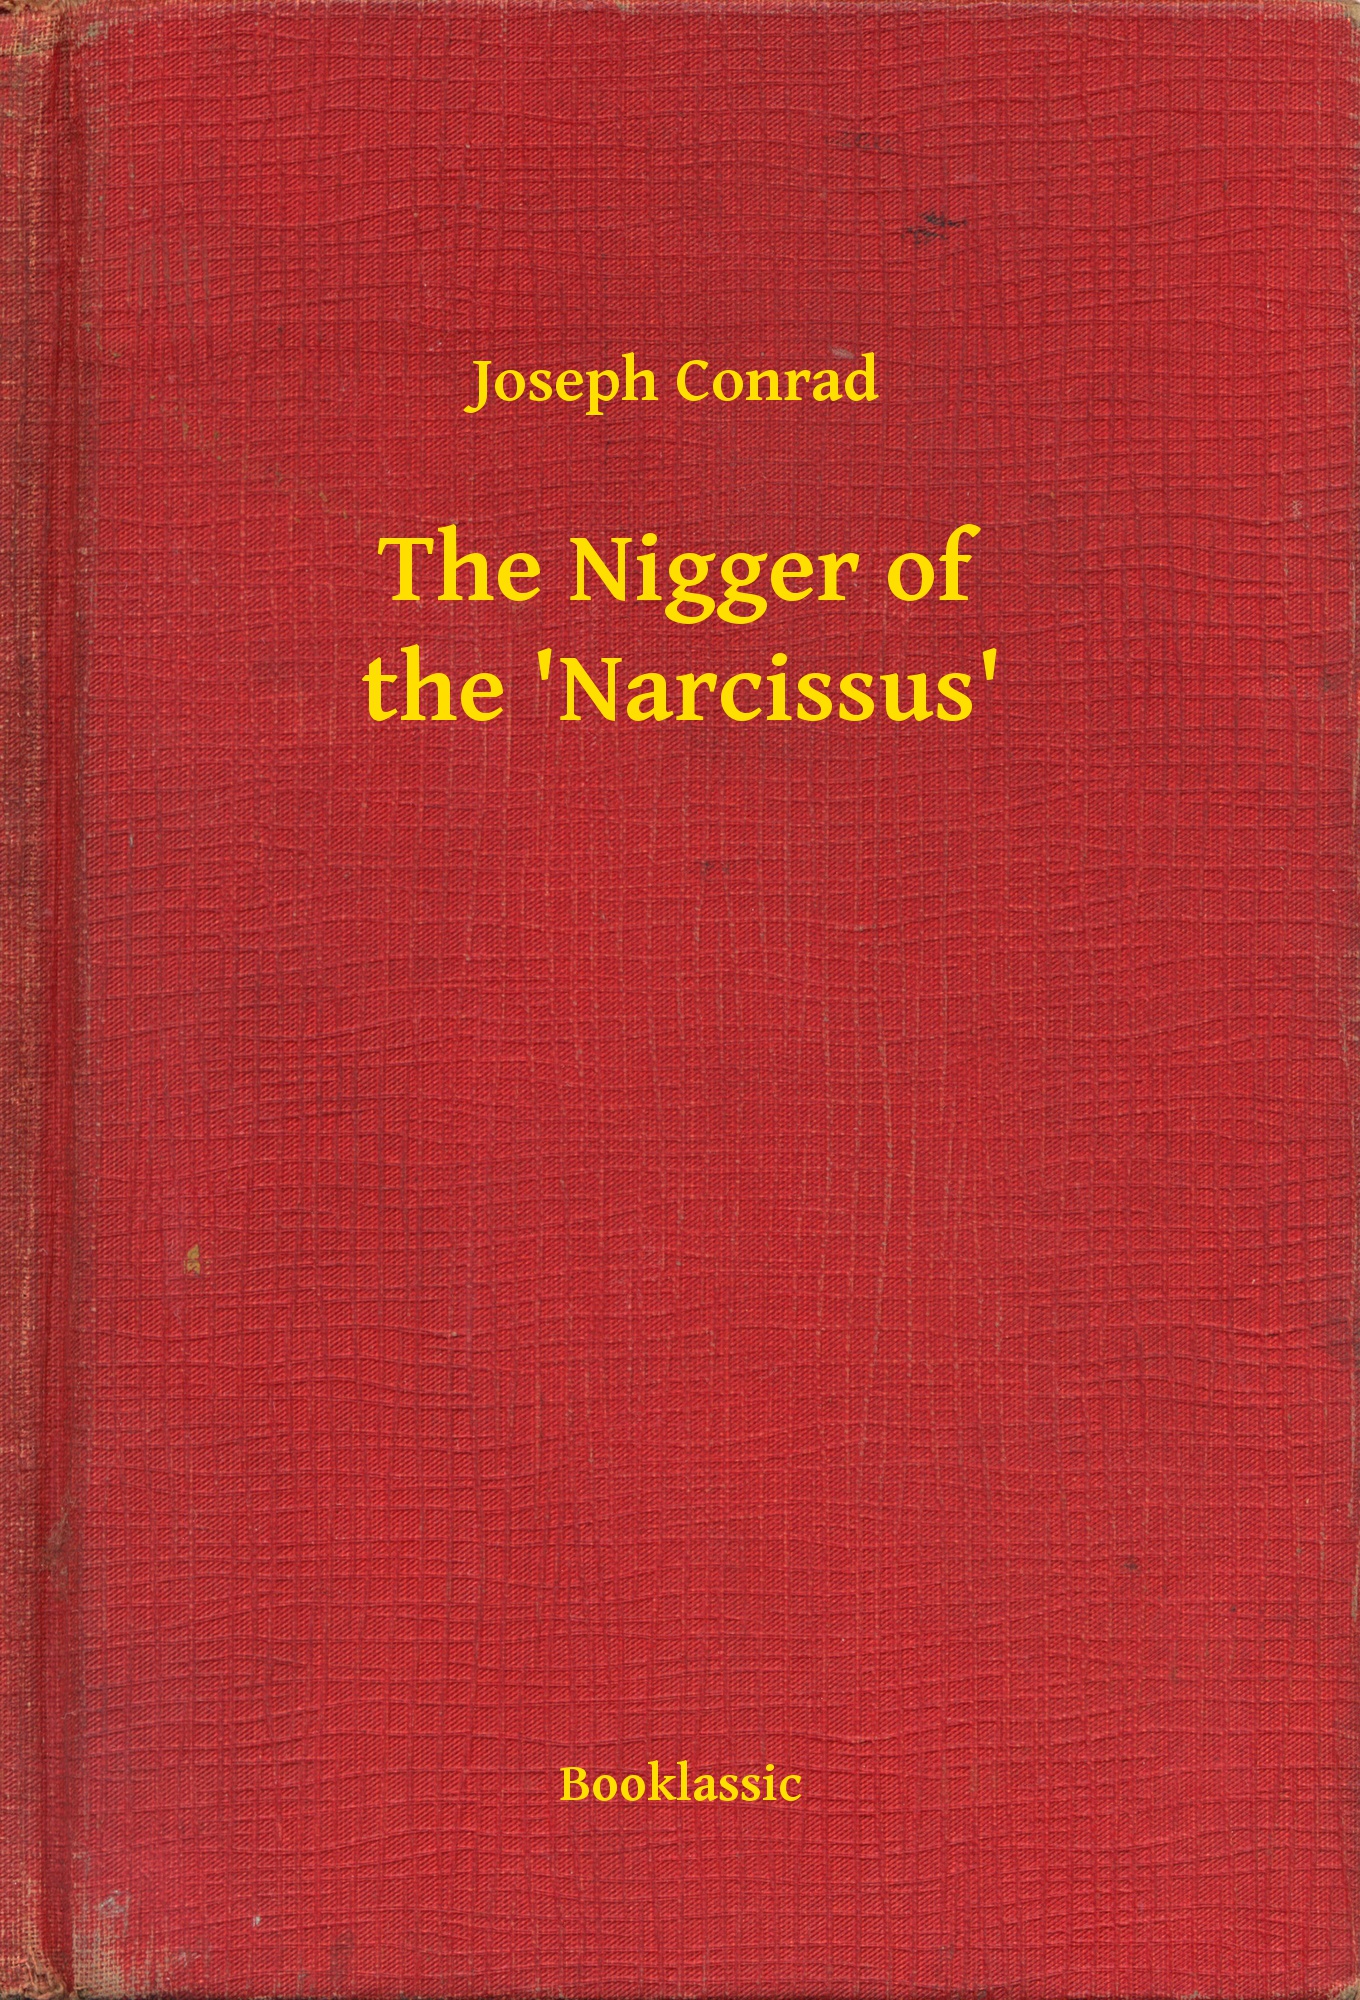 The Nigger of the "Narcissus"